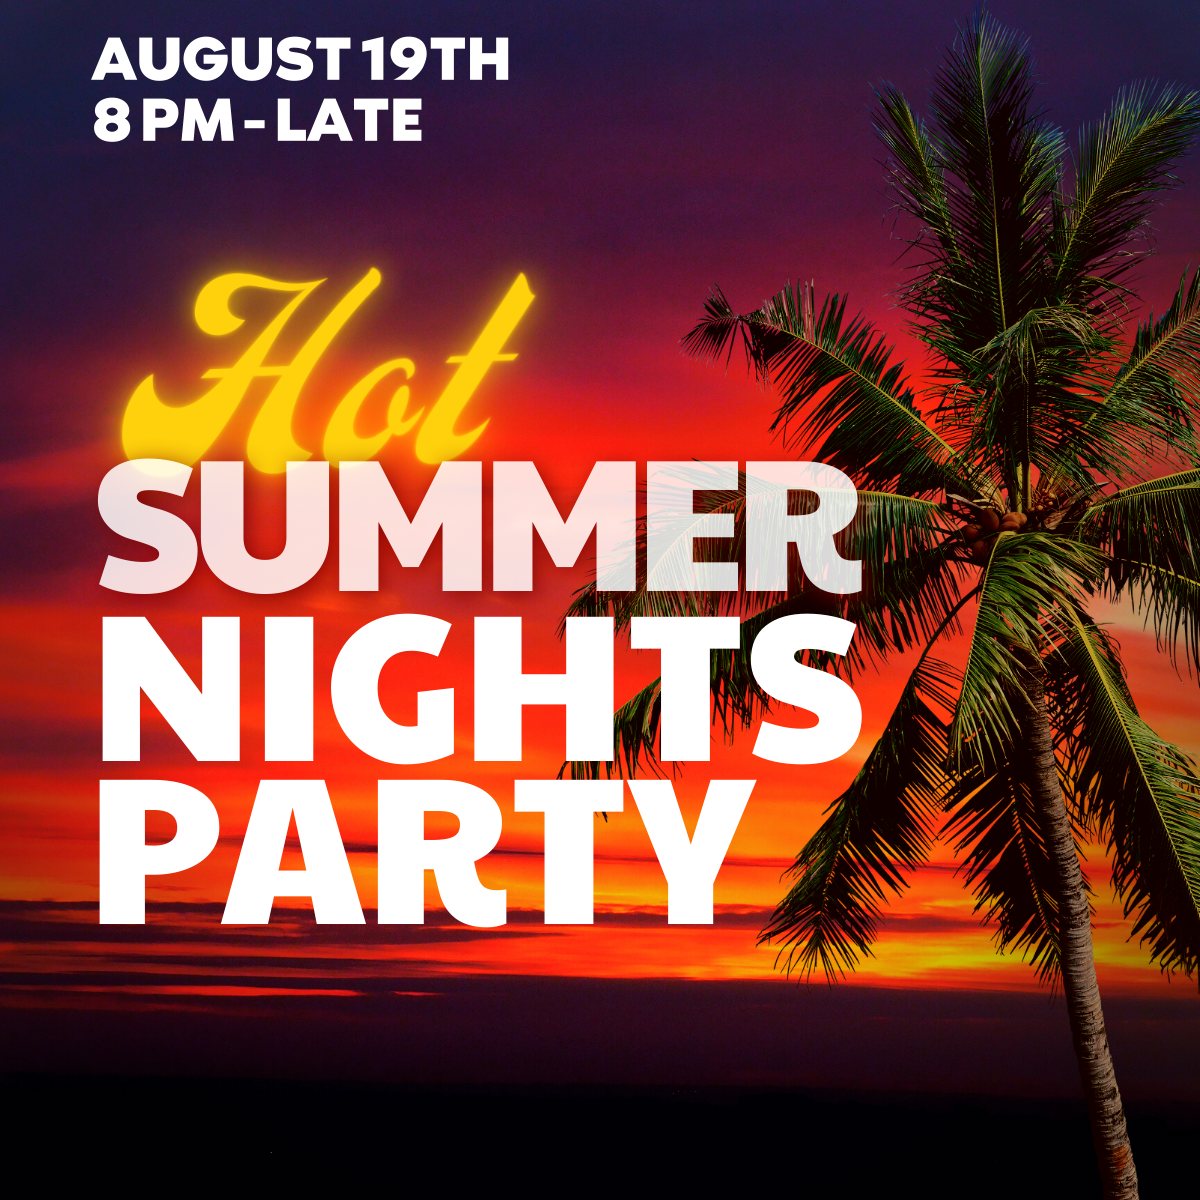 Hot Summer Nights Party